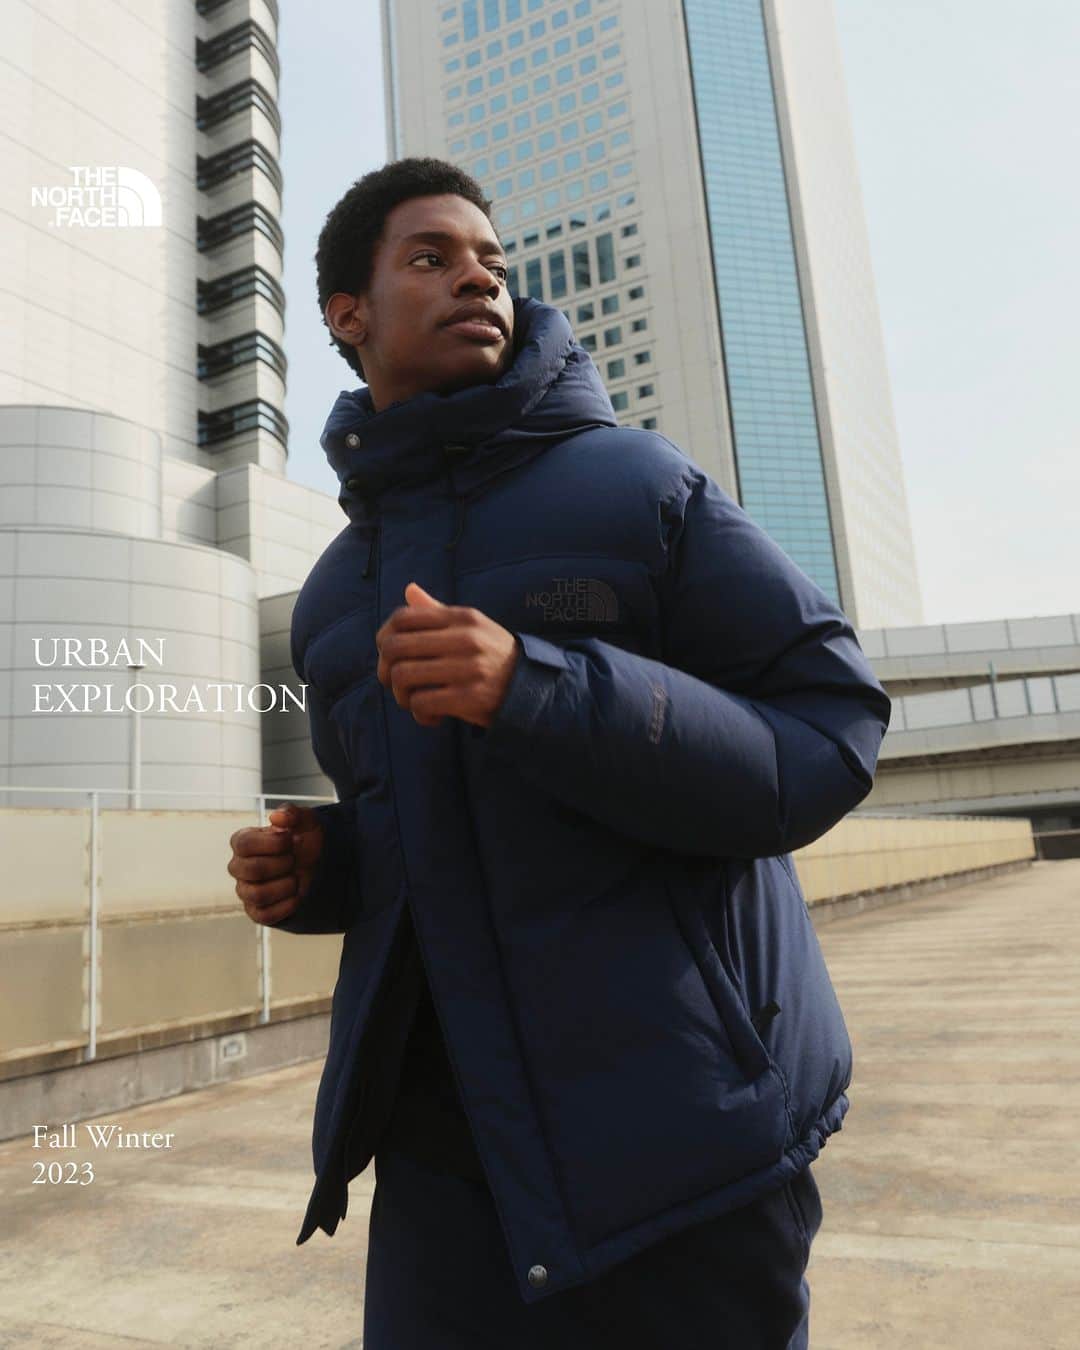 THE NORTH FACE JAPANのインスタグラム：「【URBAN EXPLORATION Fall Winter 2023】 “LOOK - 探求の装い” (New Arrivals)  (1,2) Alteration Baffs Jacket [ND92360] Price: ¥59,400(tax incl.) Color: UN  (4,5) Compilation Jacket [NP62360] Price: ¥54,450(tax incl.) Color: FR  #thenorthface #neverstopexploring #urbanexploration #fw23 #tnfjp #ザノースフェイス #探求の視点と実践」